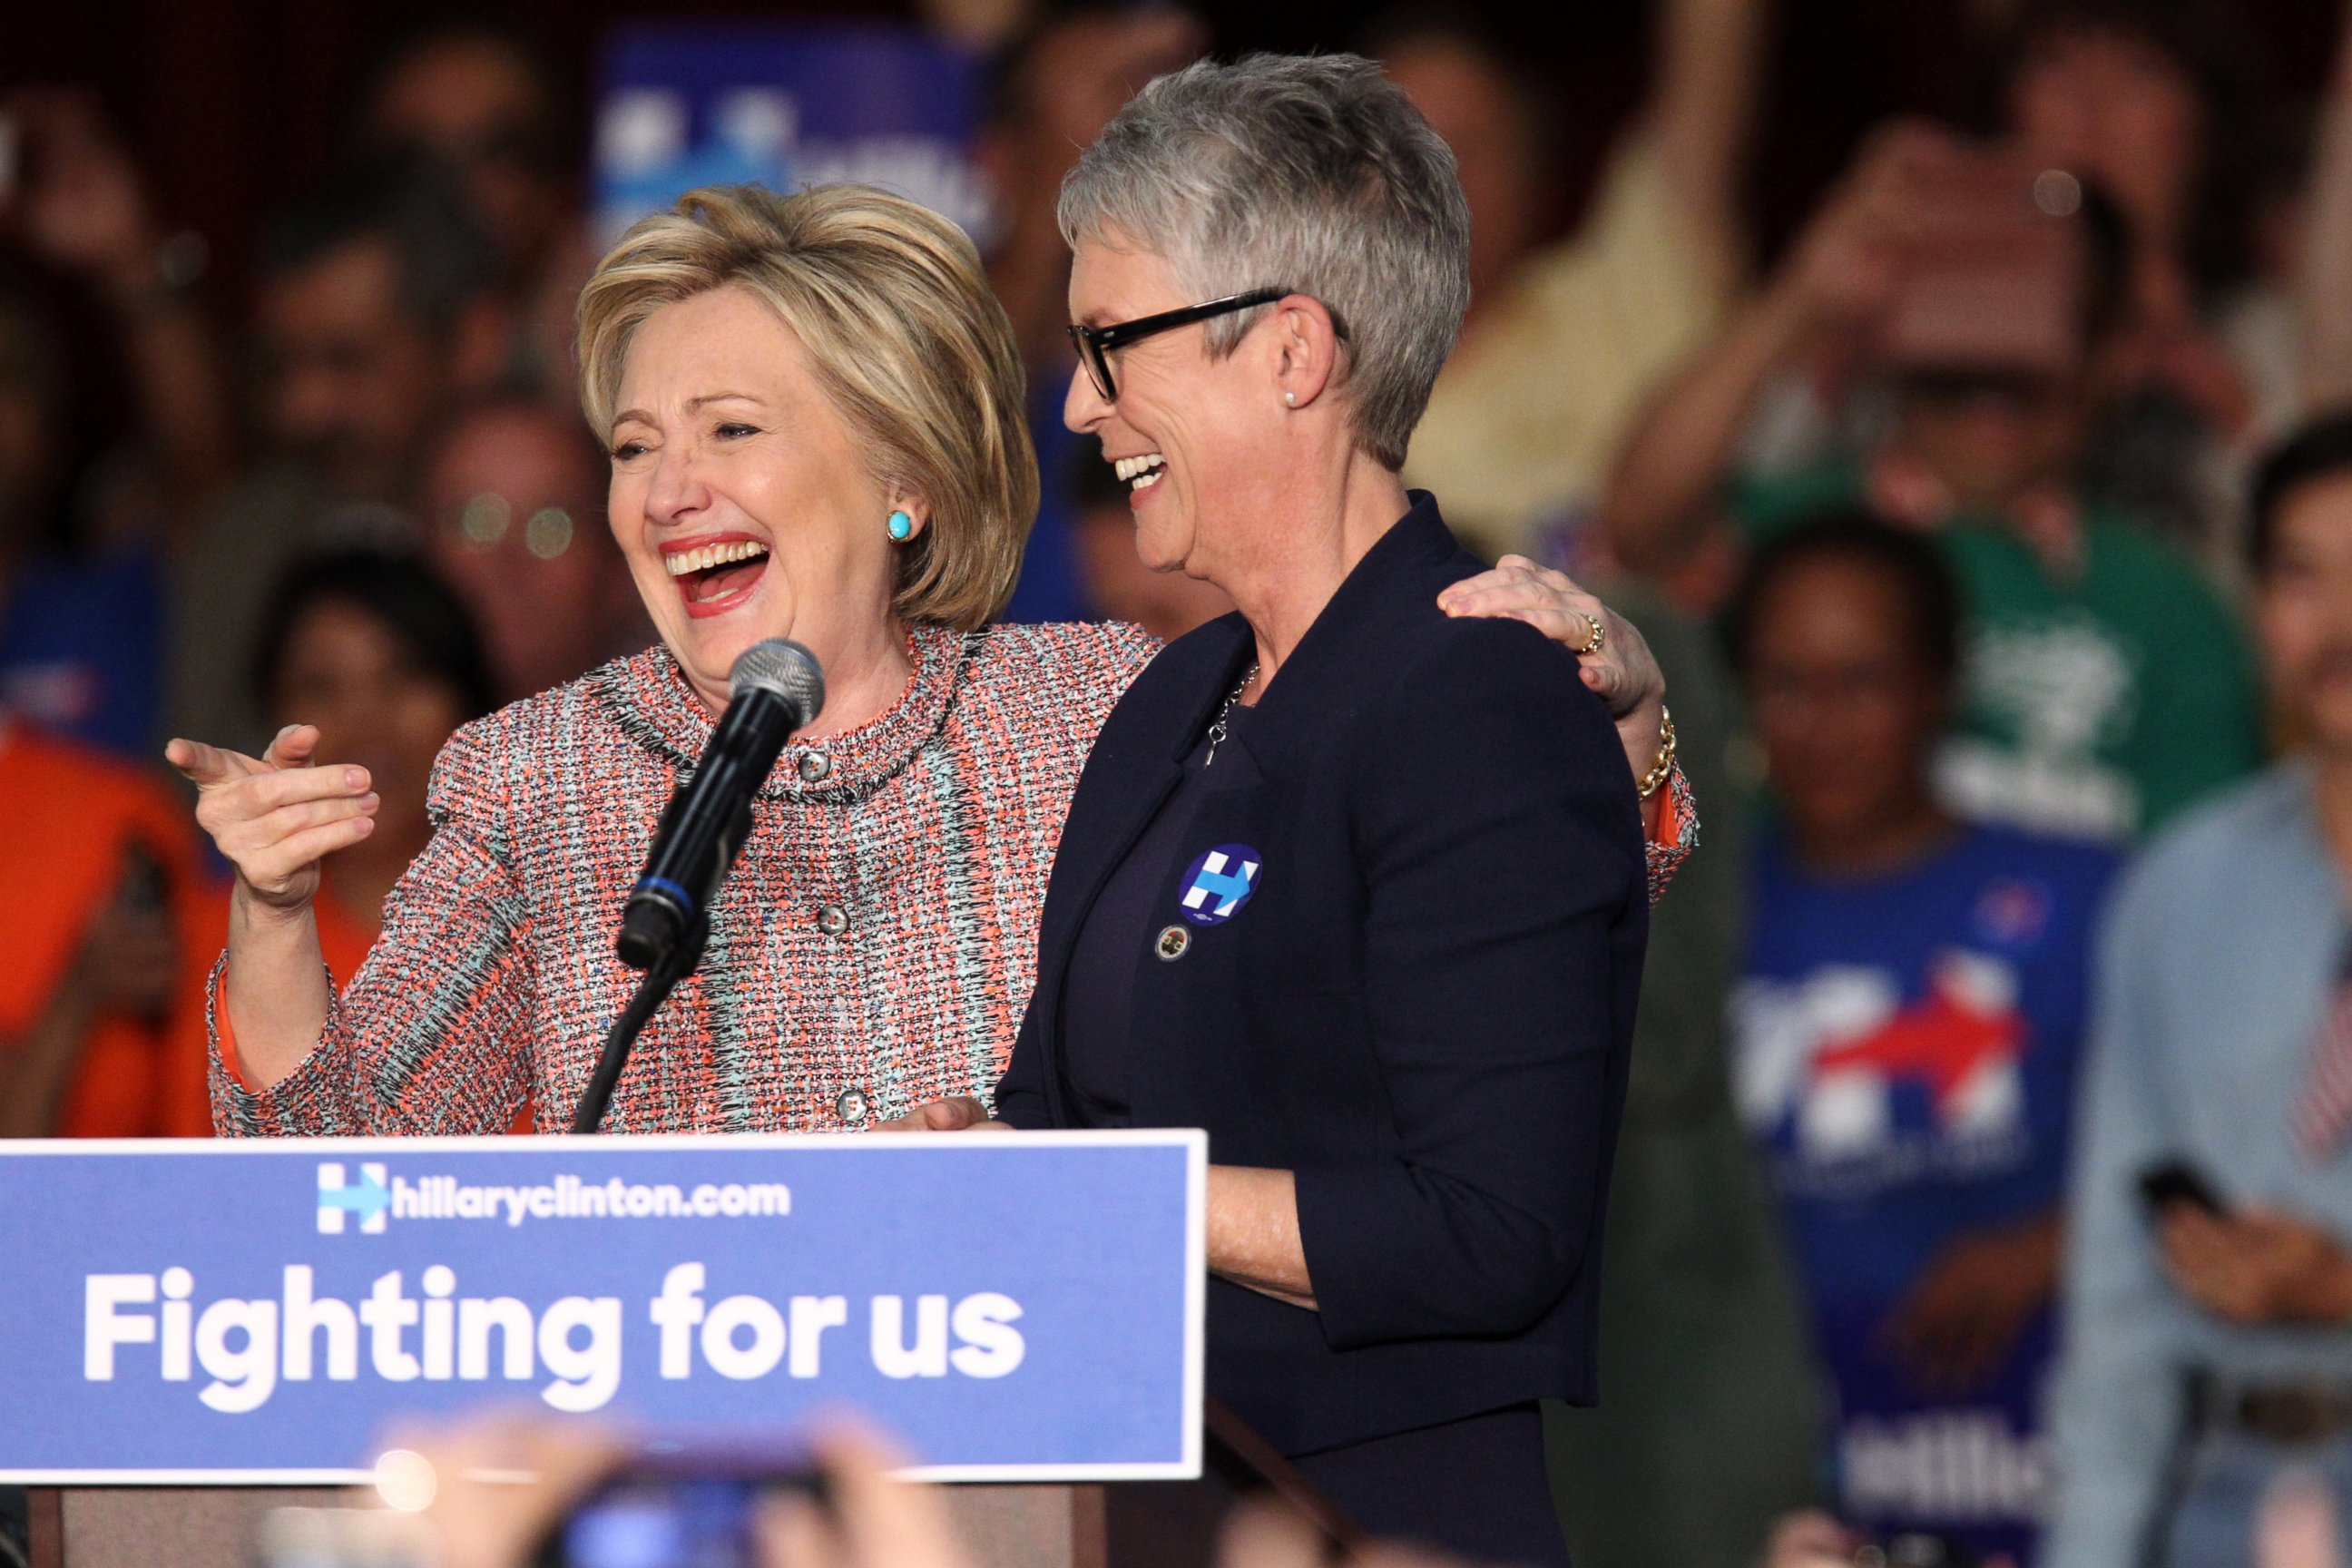 PHOTO:Democratic presidential candidate Hillary Clinton and actress Jamie Lee Curtis speak at an event at the UFCW Union Local 324, May 25, 2016, in Buena Park, Calif. 